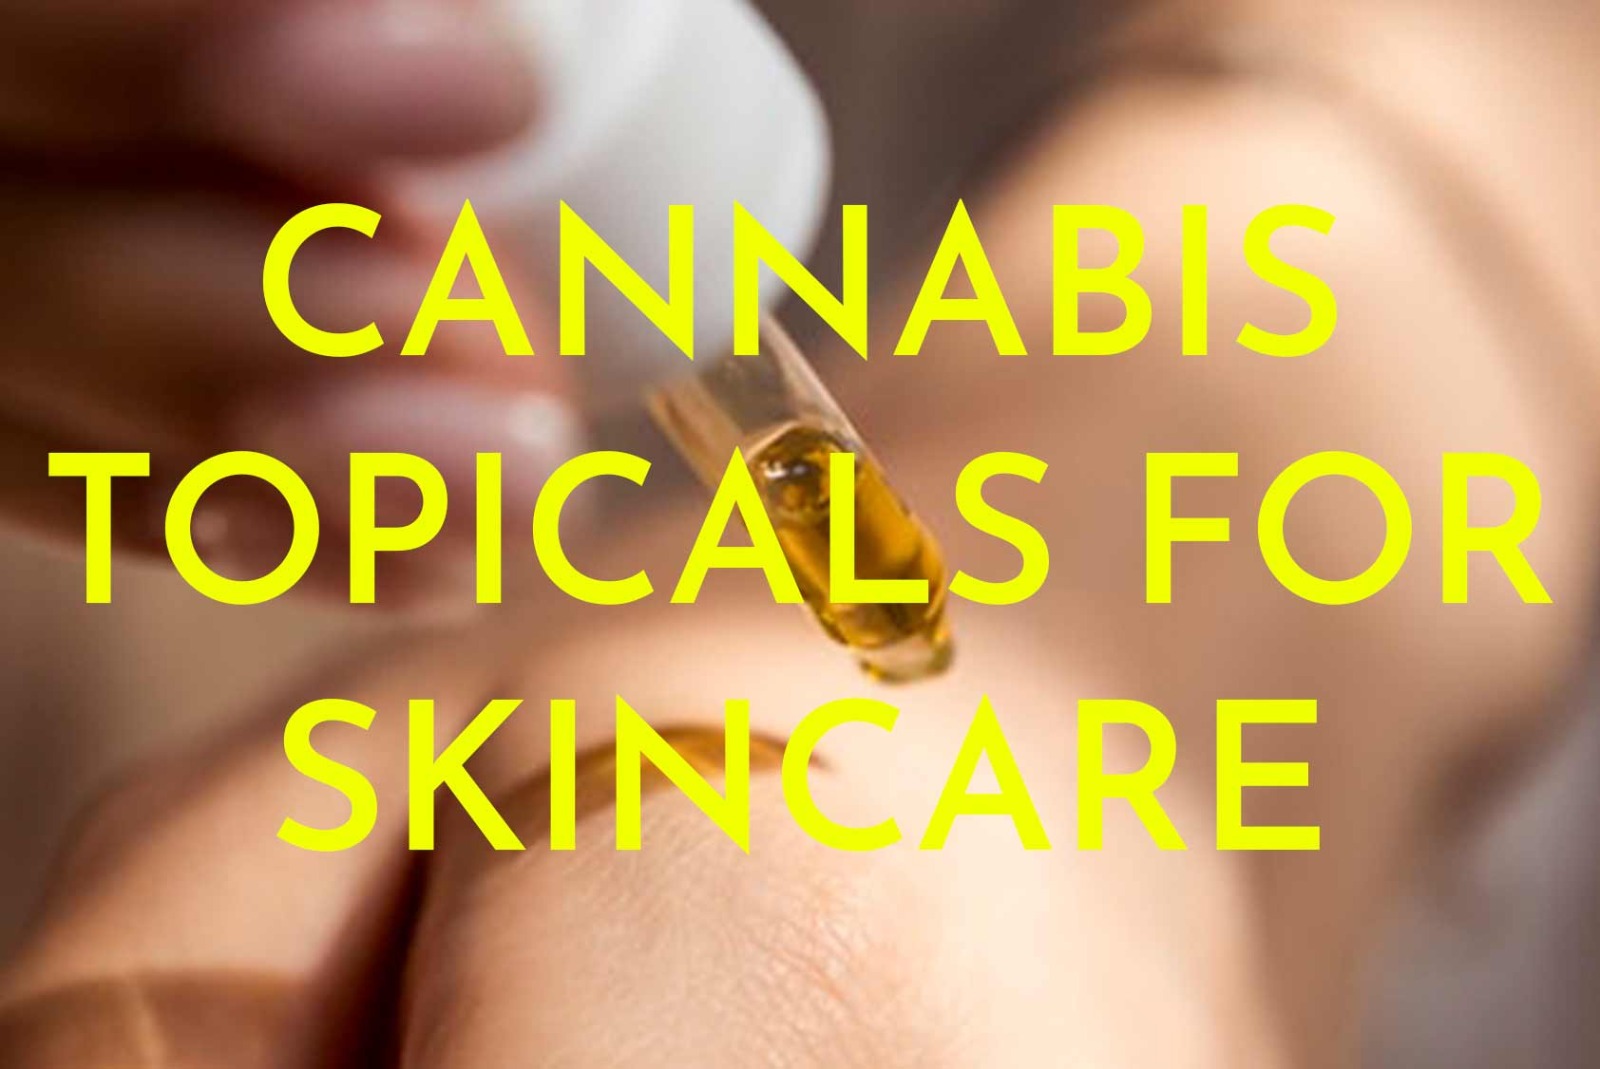 Cannabis Topicals For Skincare